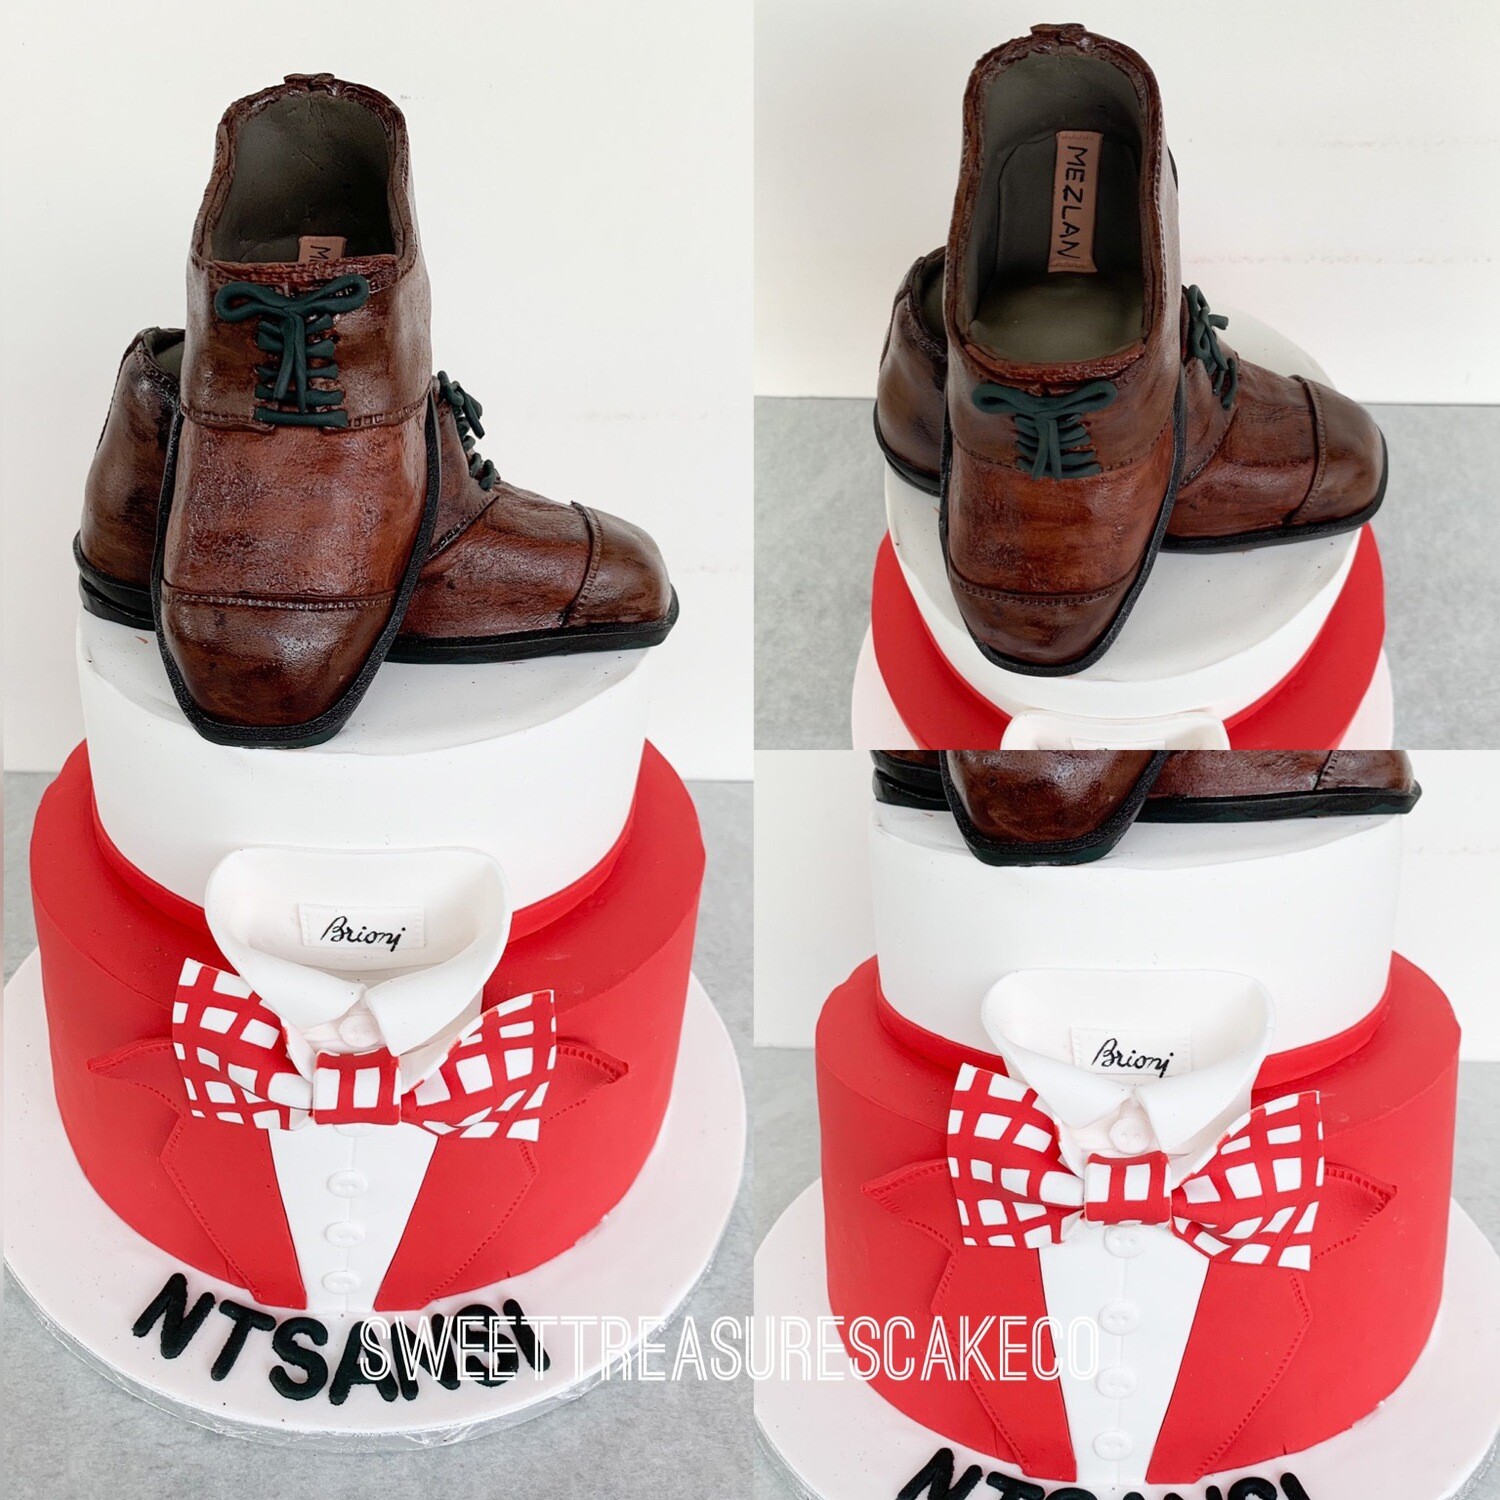 Gents Suit and Shoes 3 tier cake